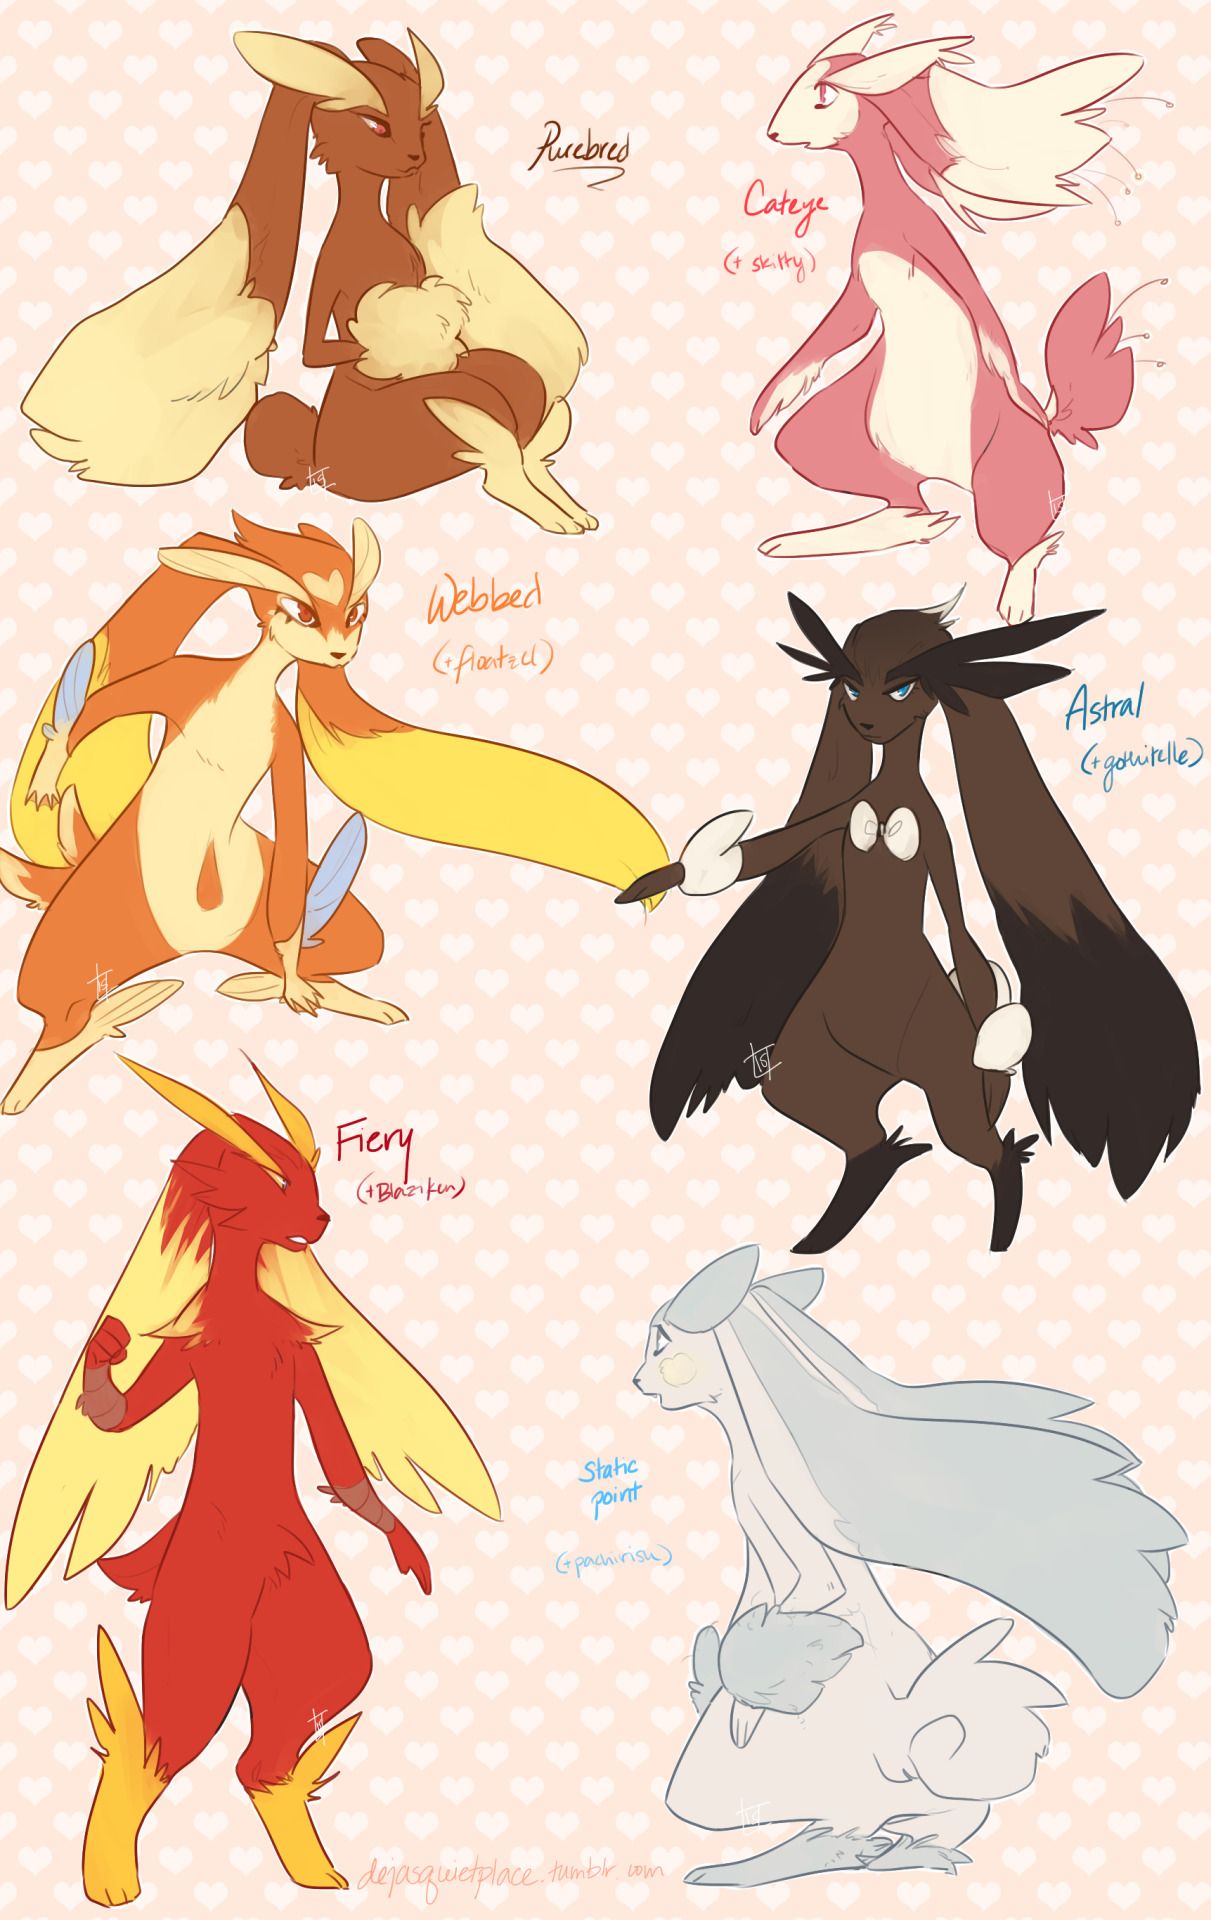 dejasquietplace:
“im not great at drawing animals, but i tried my best so i could do variations of my favorite pokemon! lovely lopunny